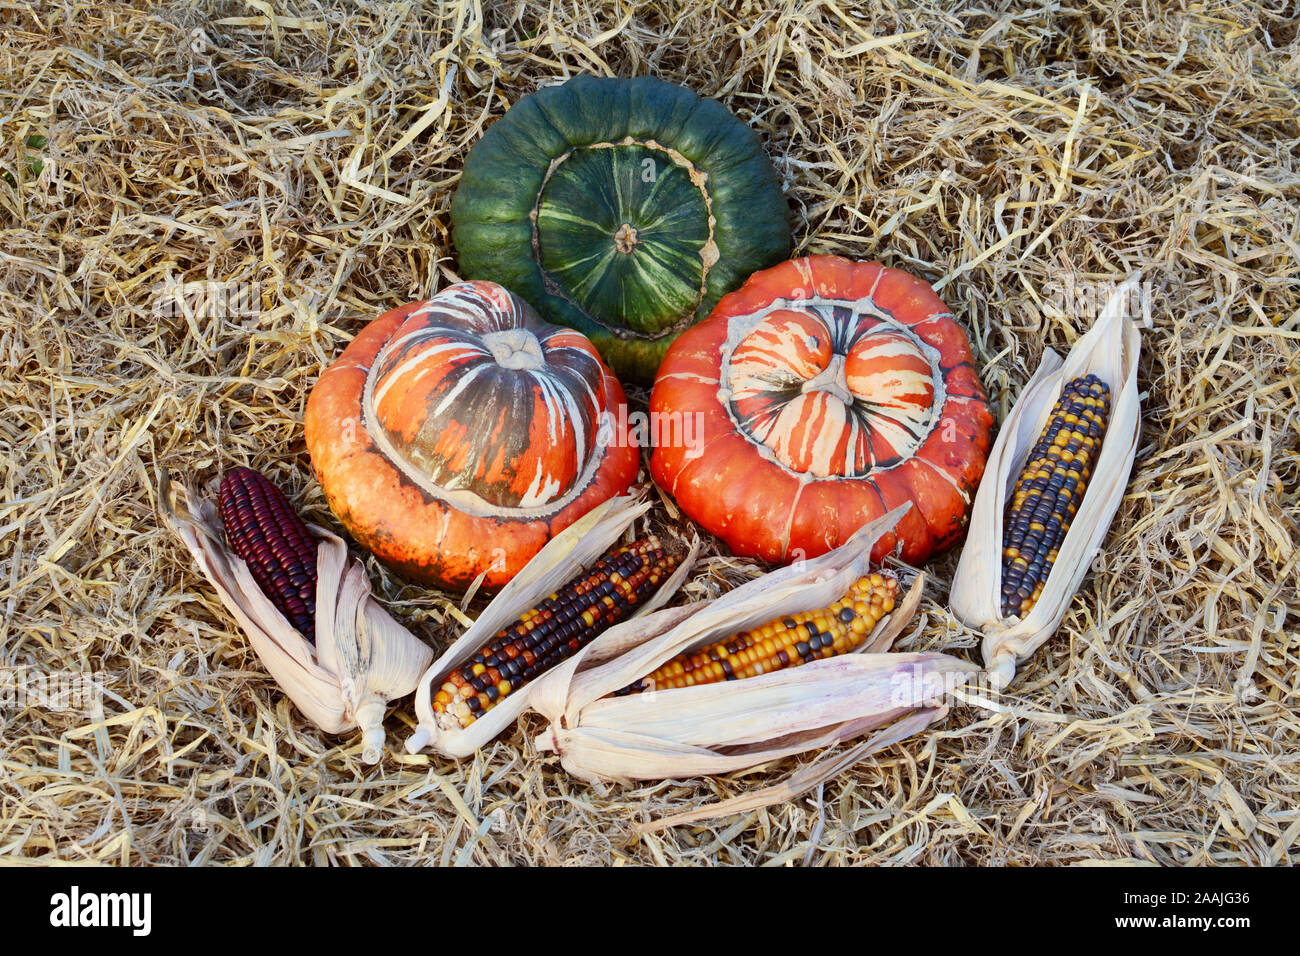 Autumnal display of Turks Turban gourds and ornamental sweetcorn harvest on a bed of fresh straw Stock Photo